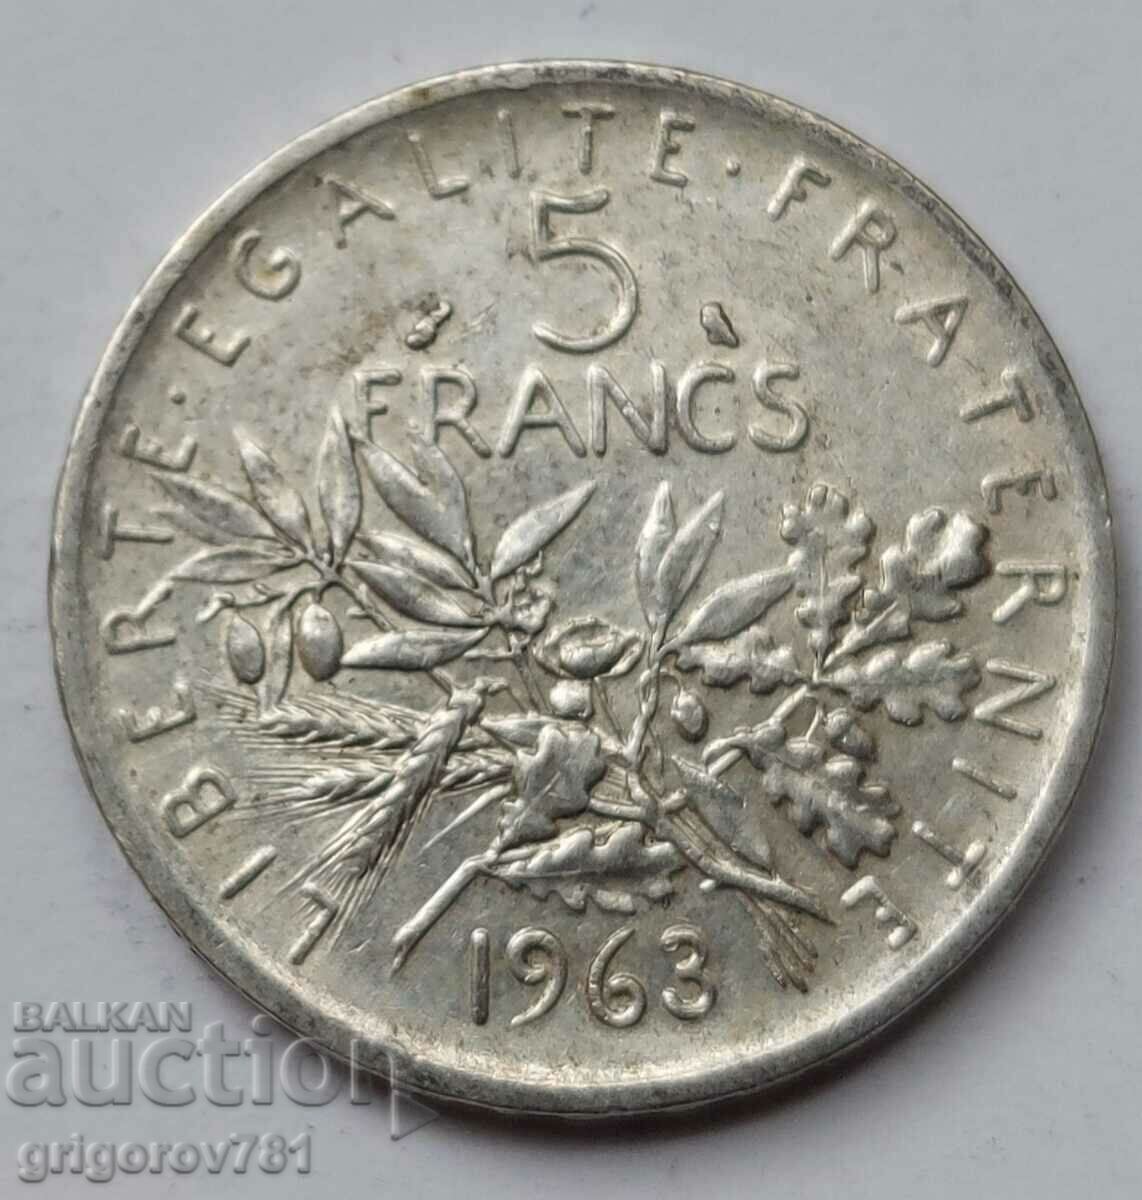 5 Francs Silver France 1963 - Silver Coin #7